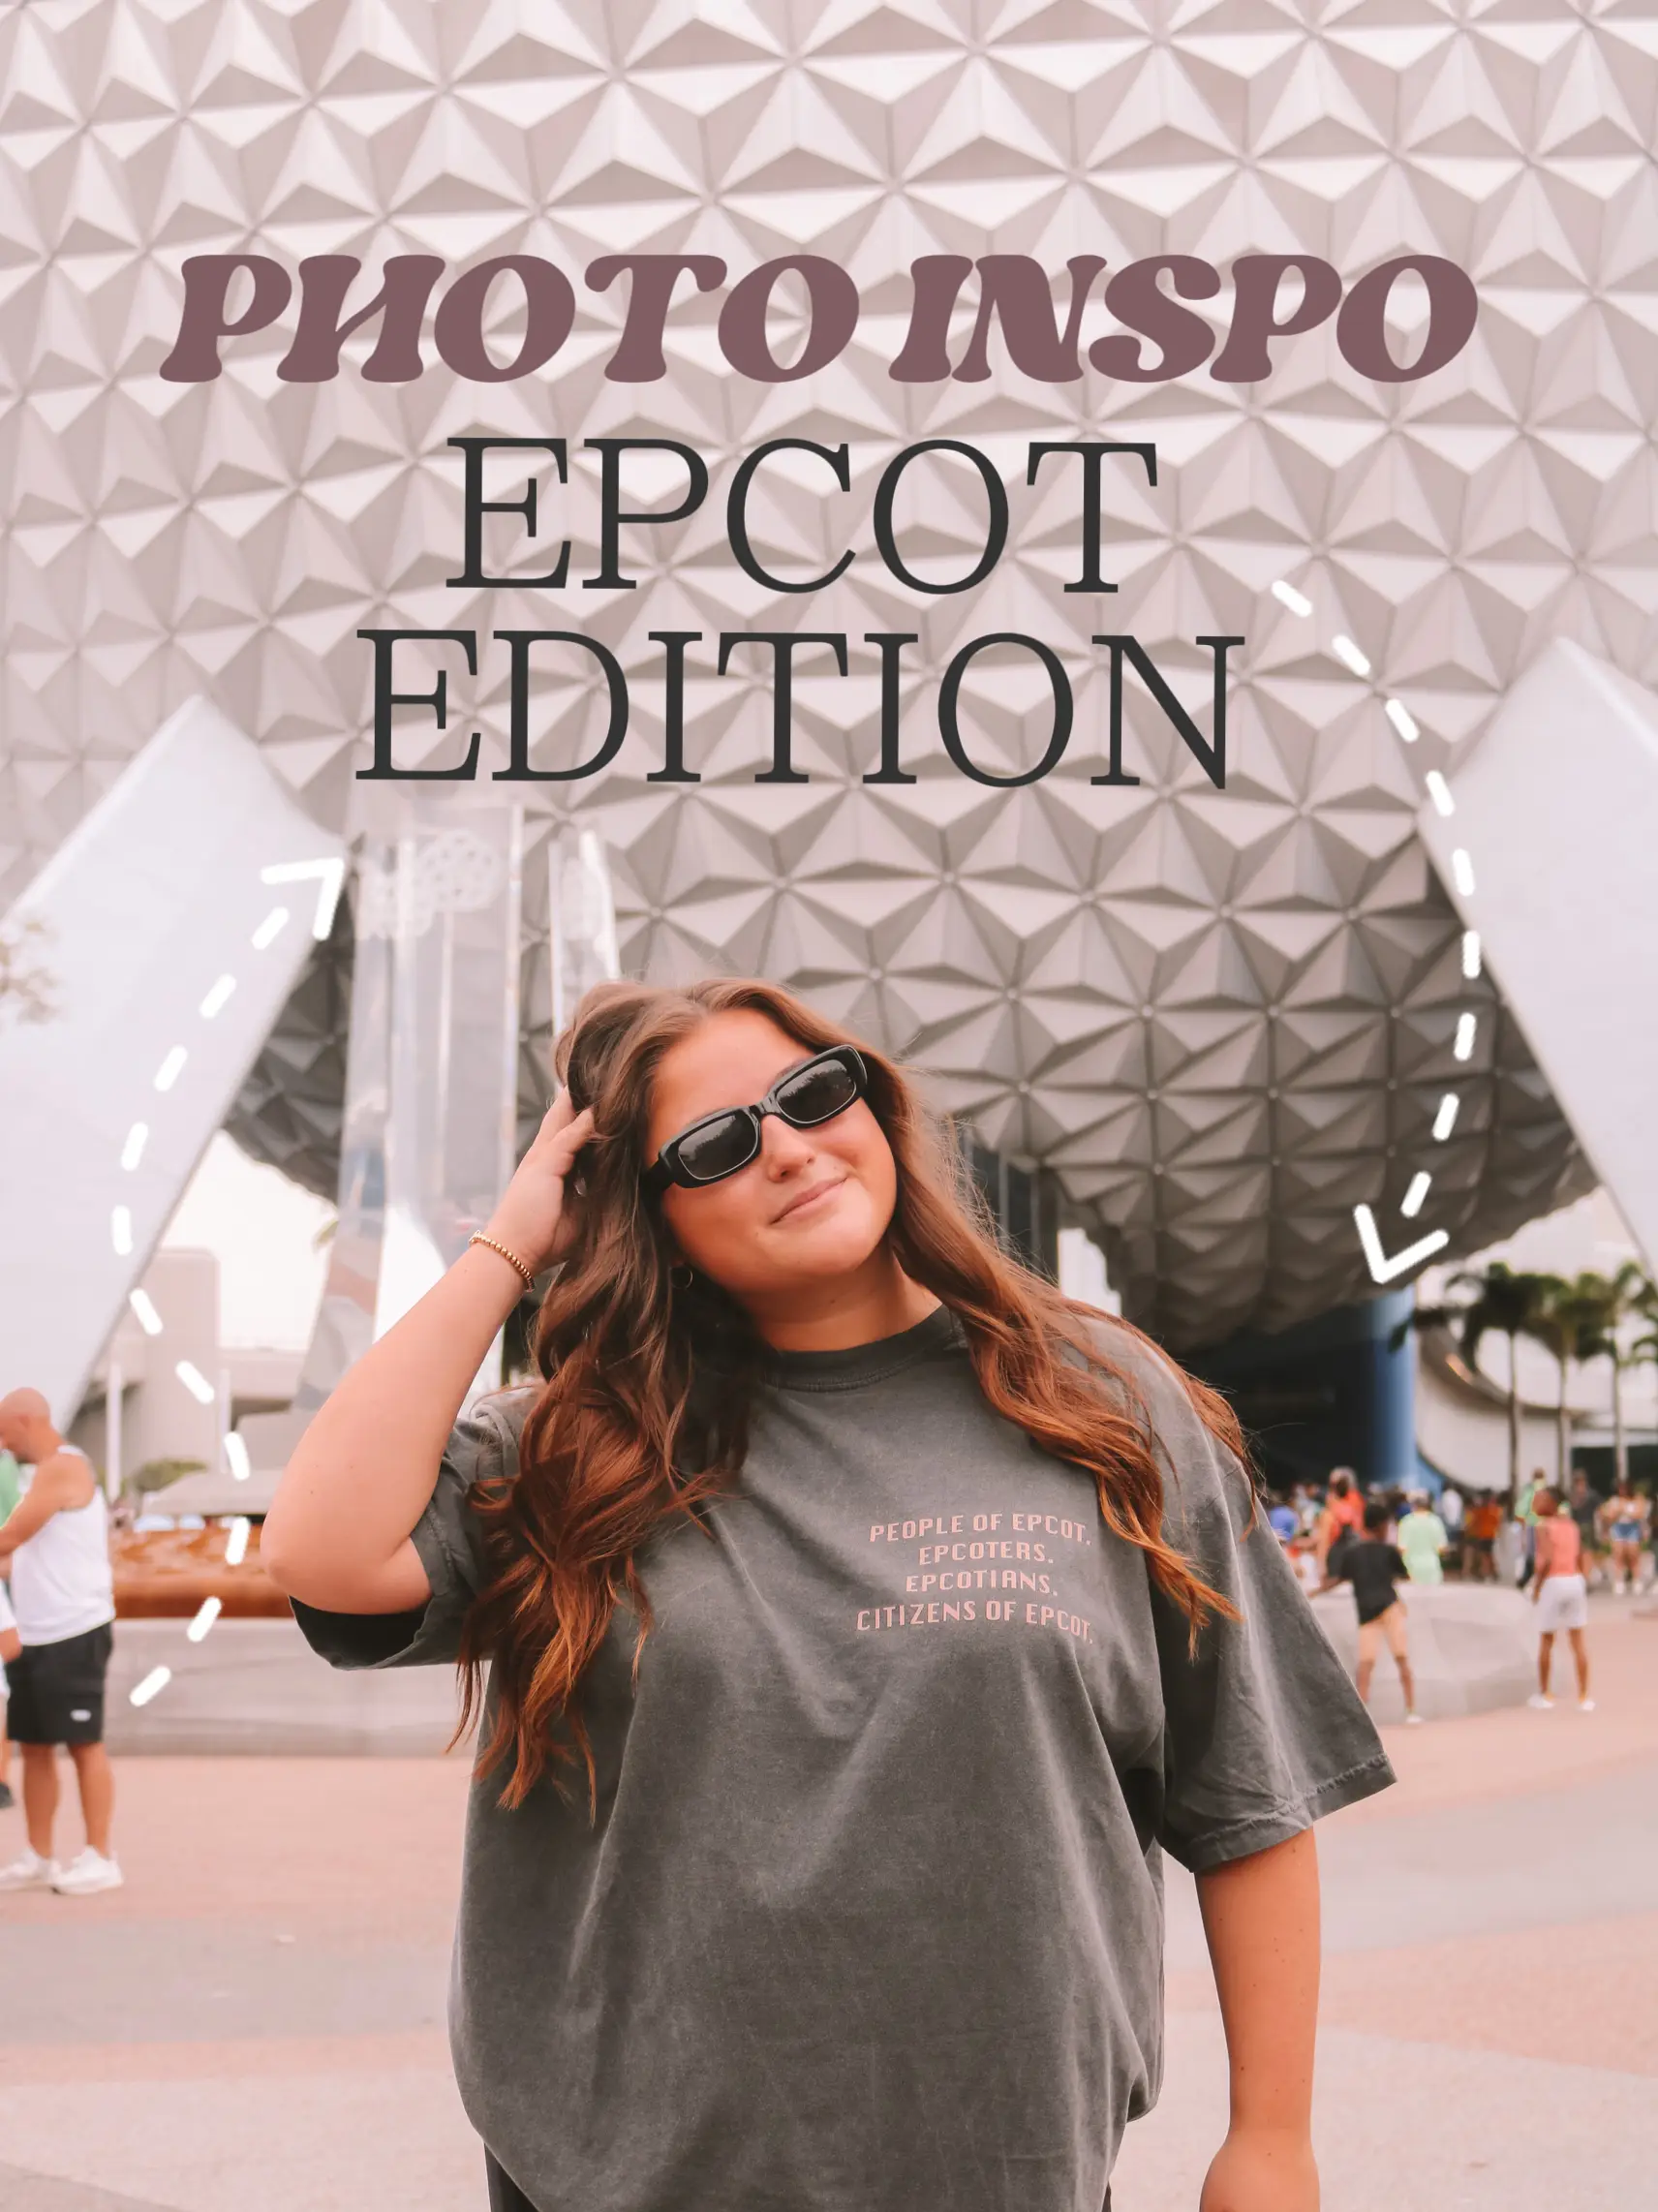 Photo Inspo for your next Epcot trip! 💫🤍's images